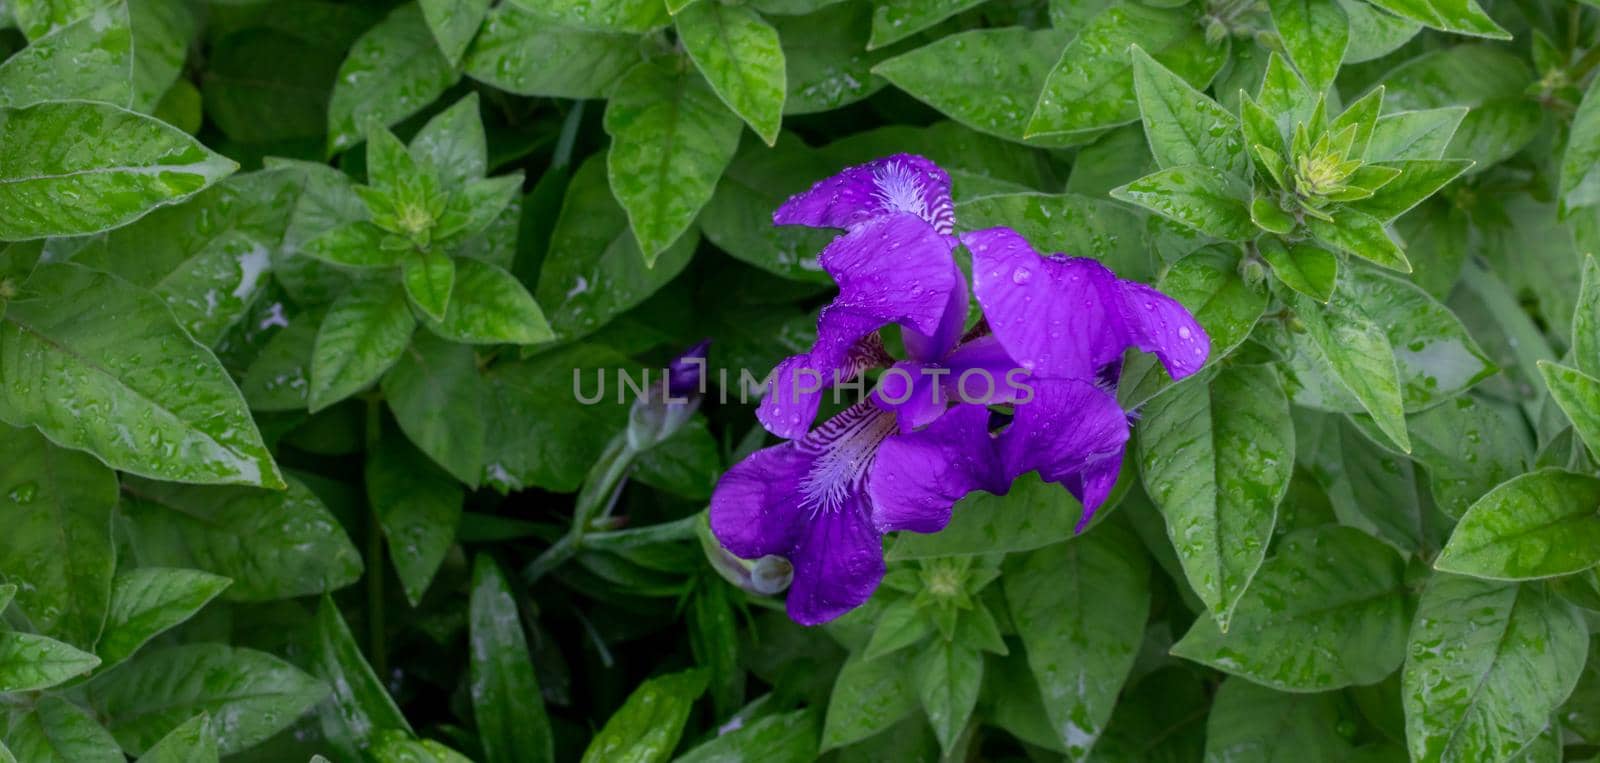 Purple iris on a background of bright green grass and herbs. Gardening, growing perennial plants in a flower bed.